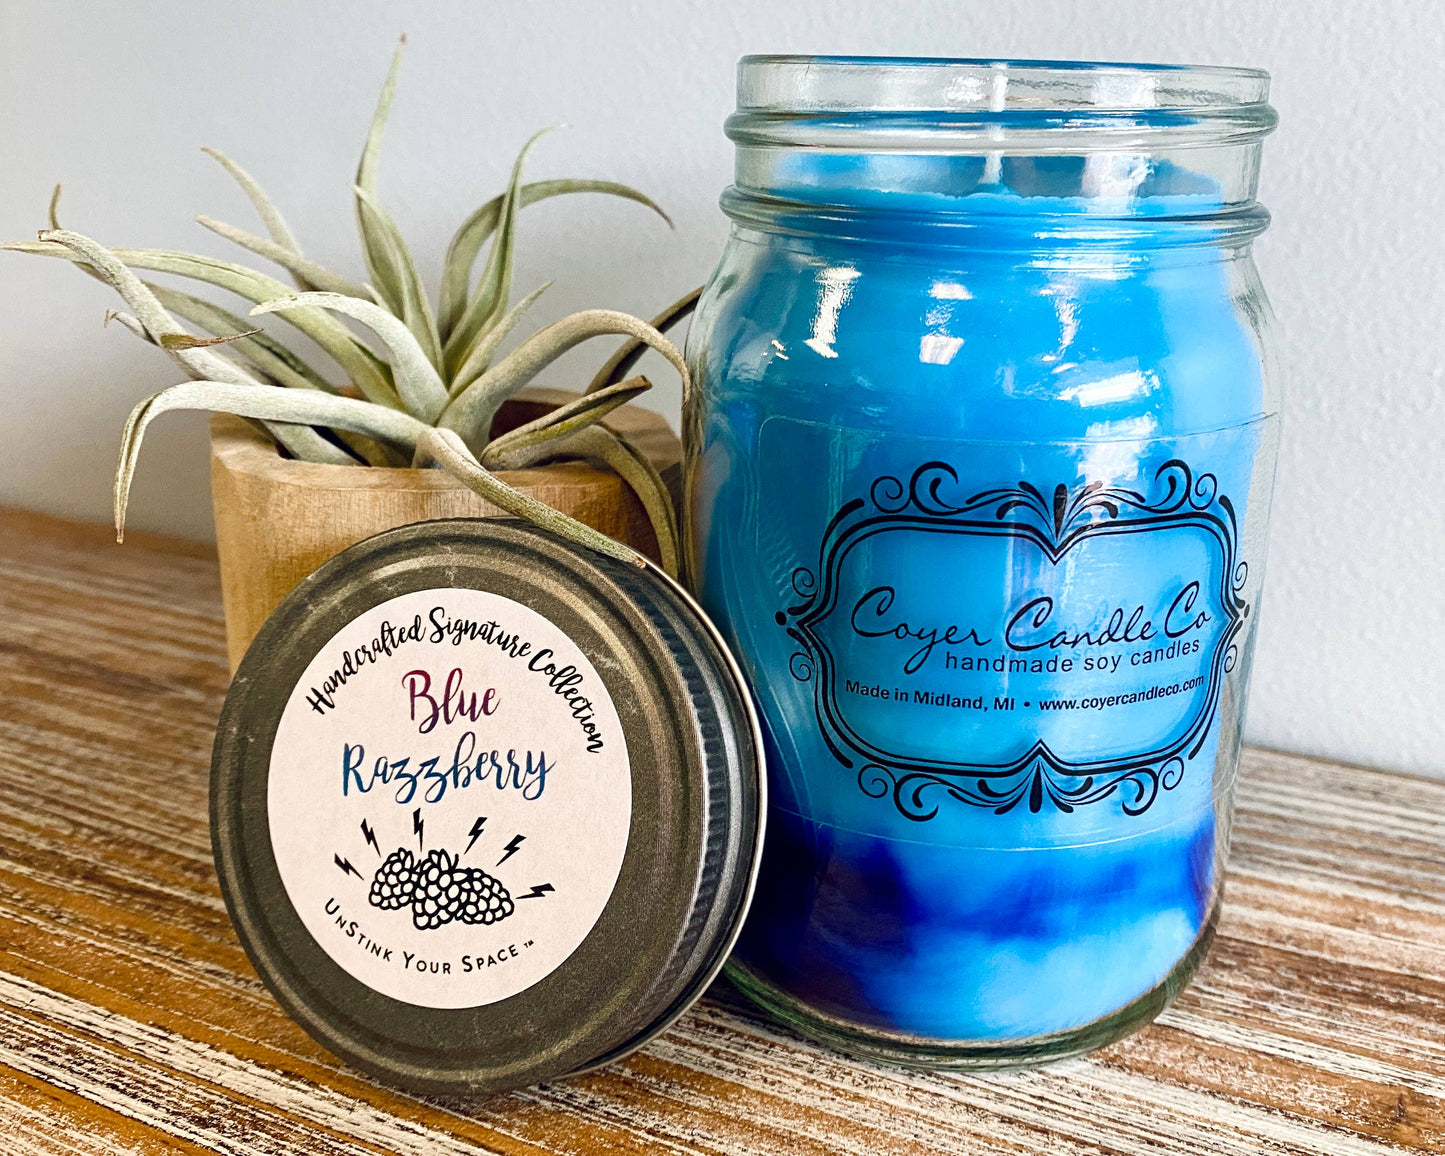 Coyer Candle Co. - 16 oz. Pint Mason Jar Candles - Spring Collection: Pecans n' Maple Syrup Waffles